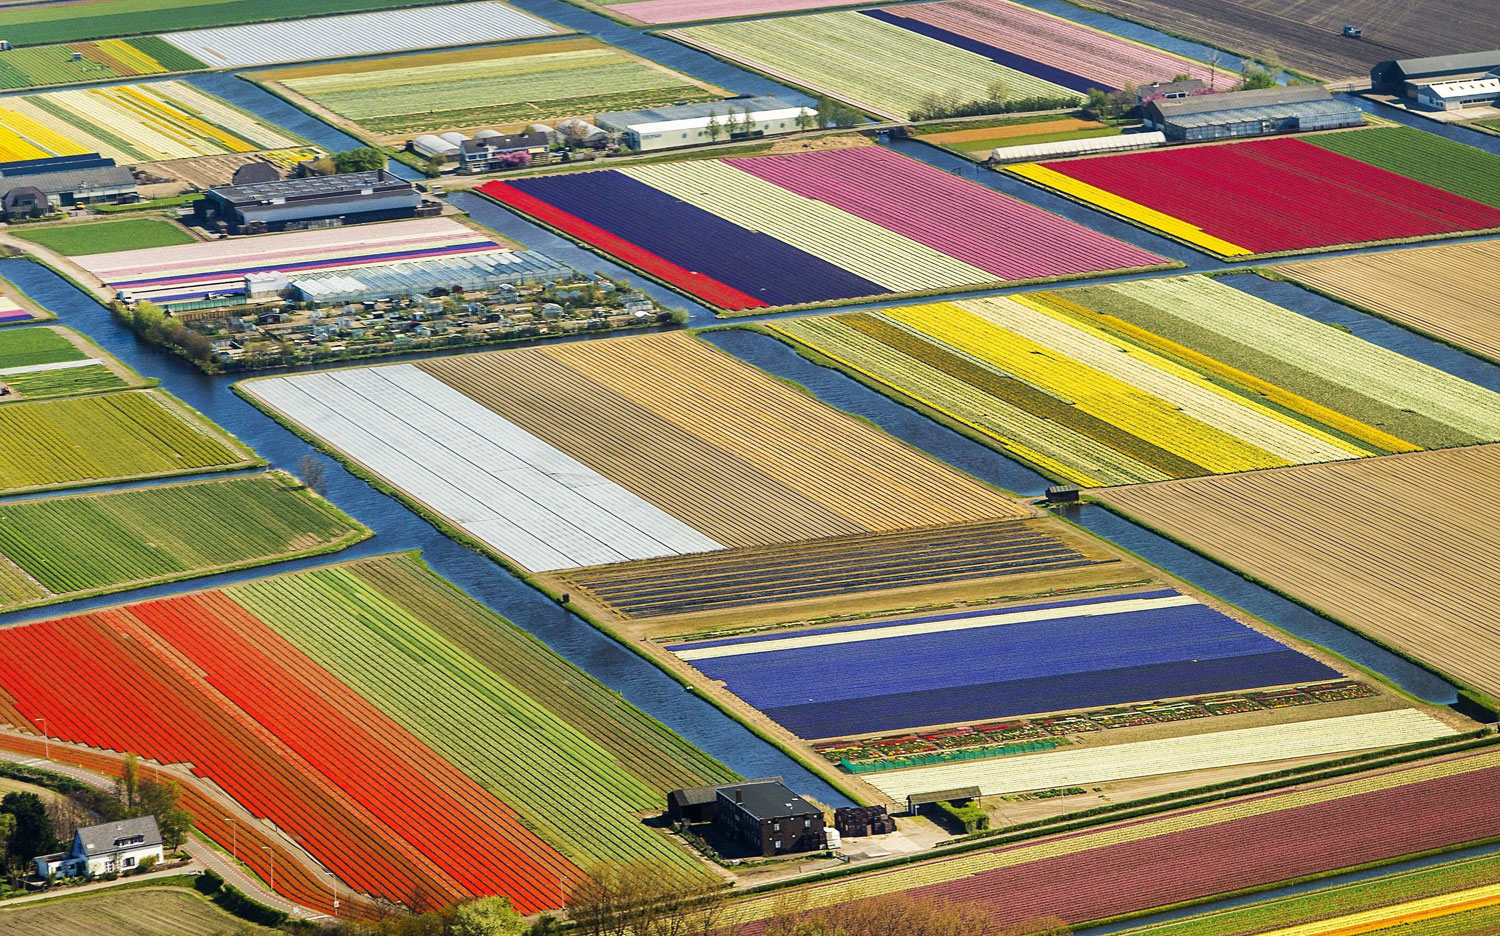 An aerial view of tulips in Lisse, Netherlands on April 9, 2014.